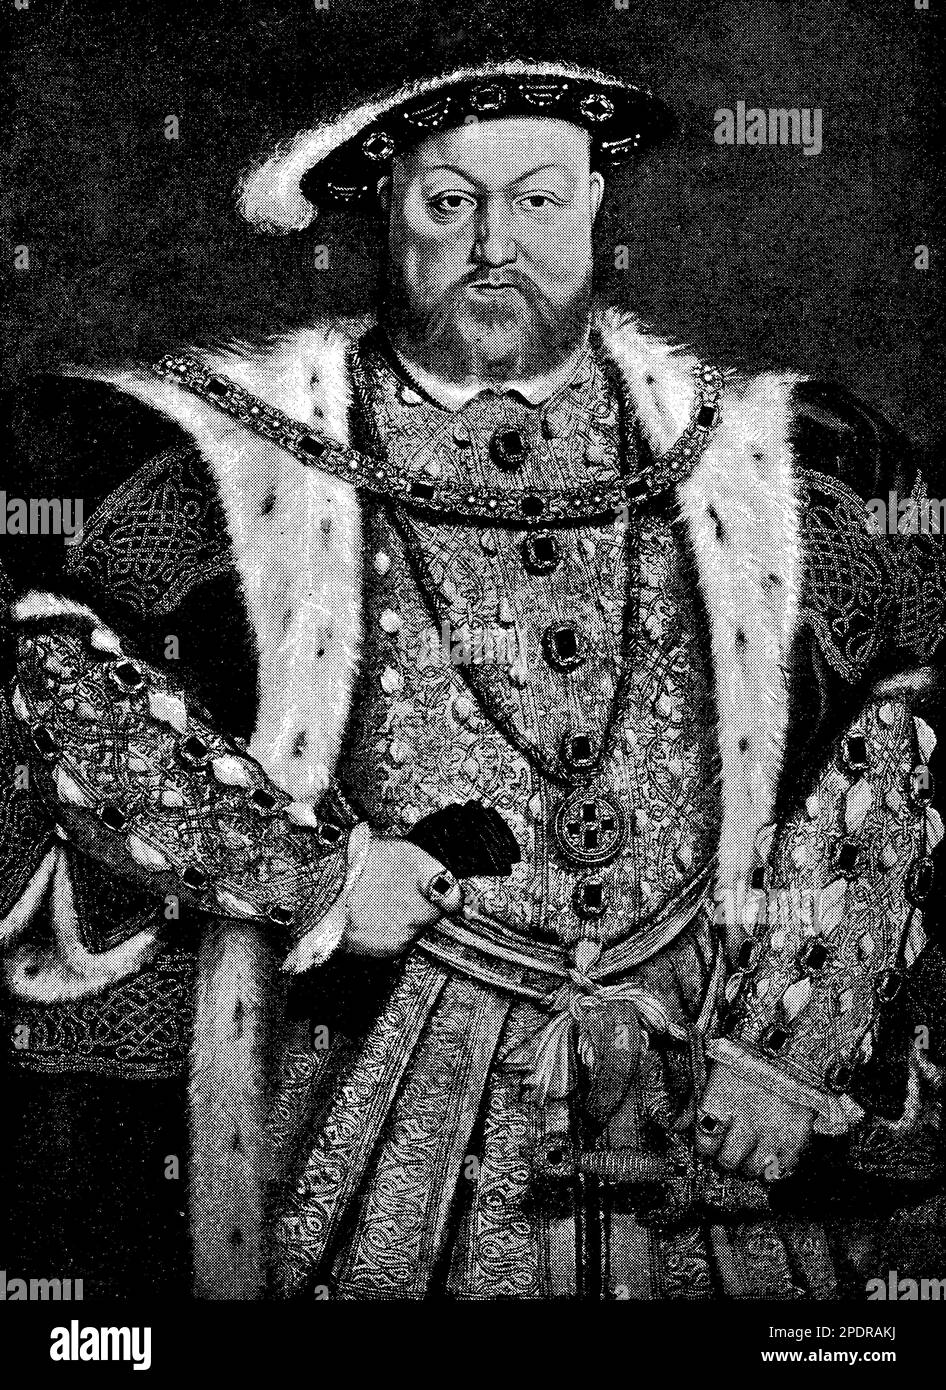 Henry VIII (1491-1547) was the second Tudor king of England and is perhaps best known for his six marriages and his role in the English Reformation. His desire for a male heir, and his frustration at not being able to obtain one with his first two wives, led him to seek an annulment from the Pope, and eventually to break from the Catholic Church and establish the Church of England. Henry was also known for his love of hunting, music, and sports, as well as his volatile temper and ruthless political maneuvering. He is often depicted as a larger-than-life figure, both in historical and popular c Stock Photo